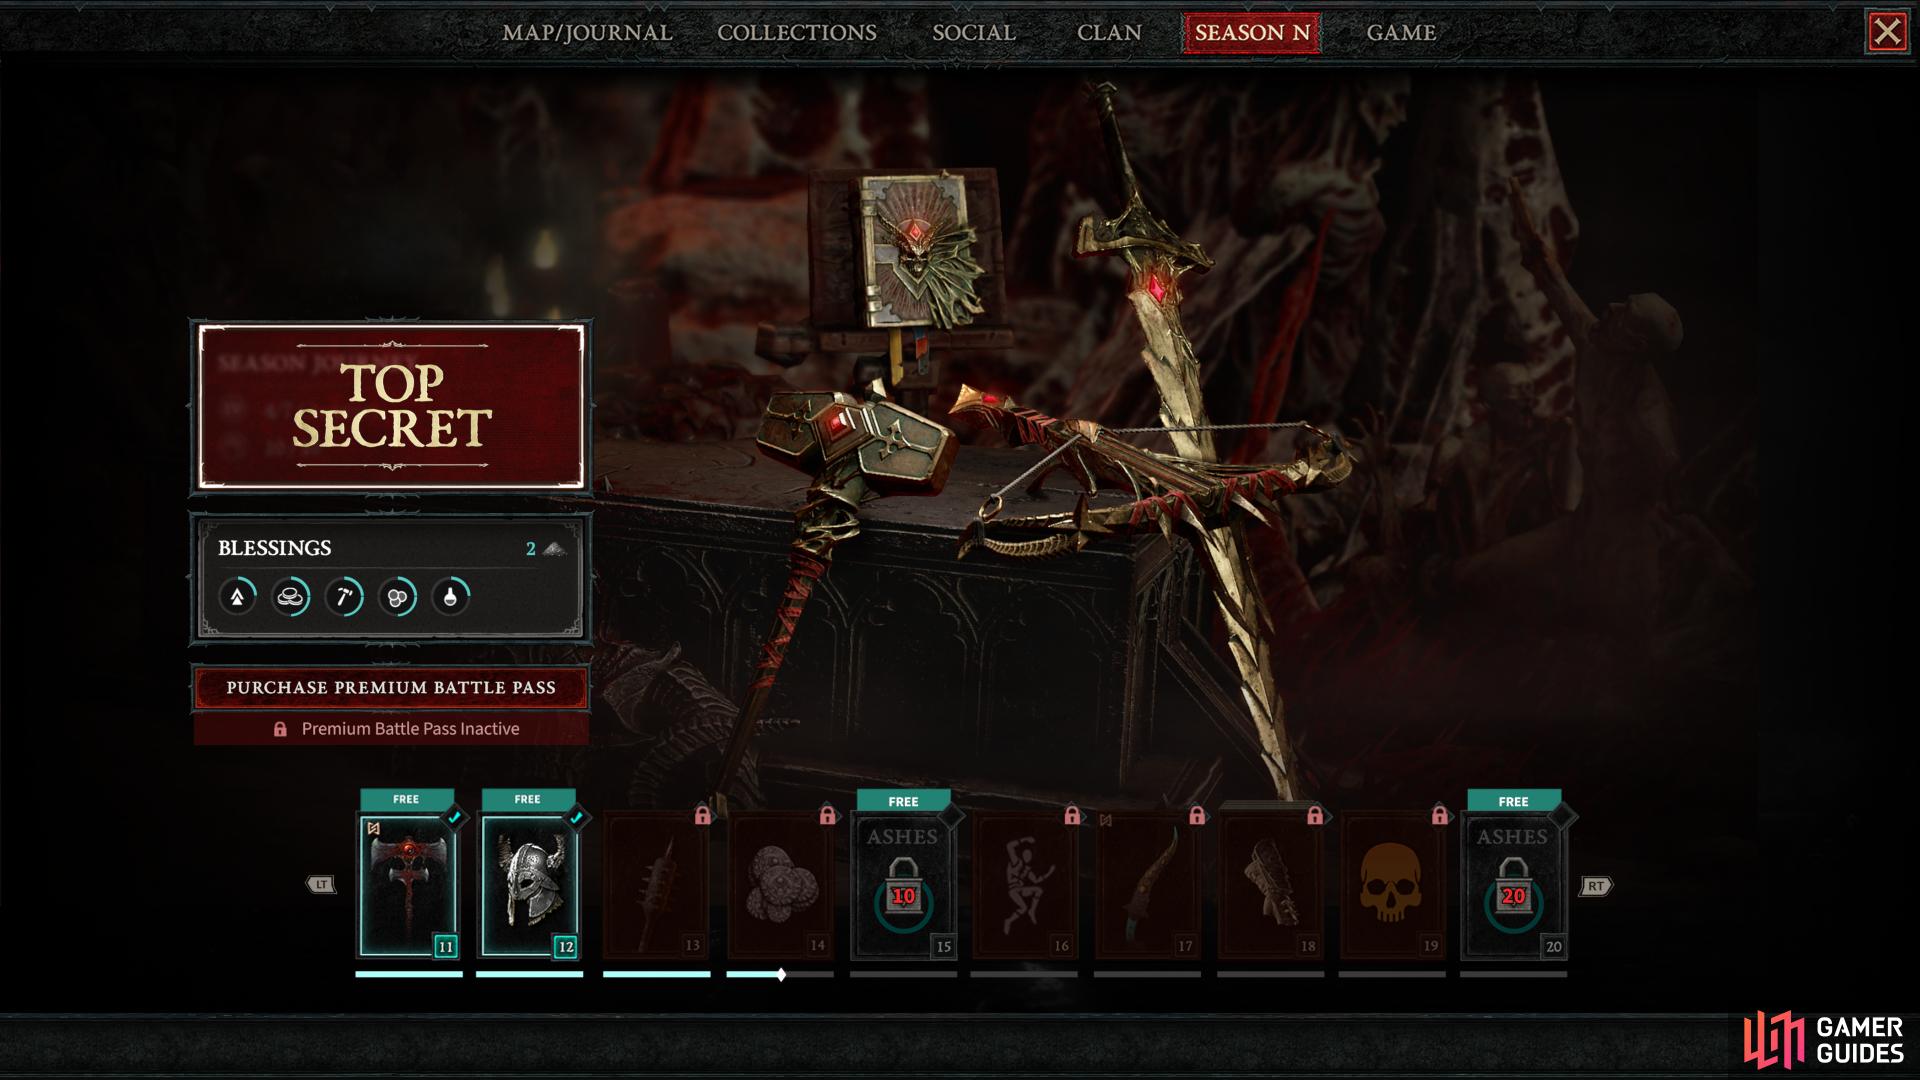 Here is a look at how the Diablo 4 Battle Pass system will work.